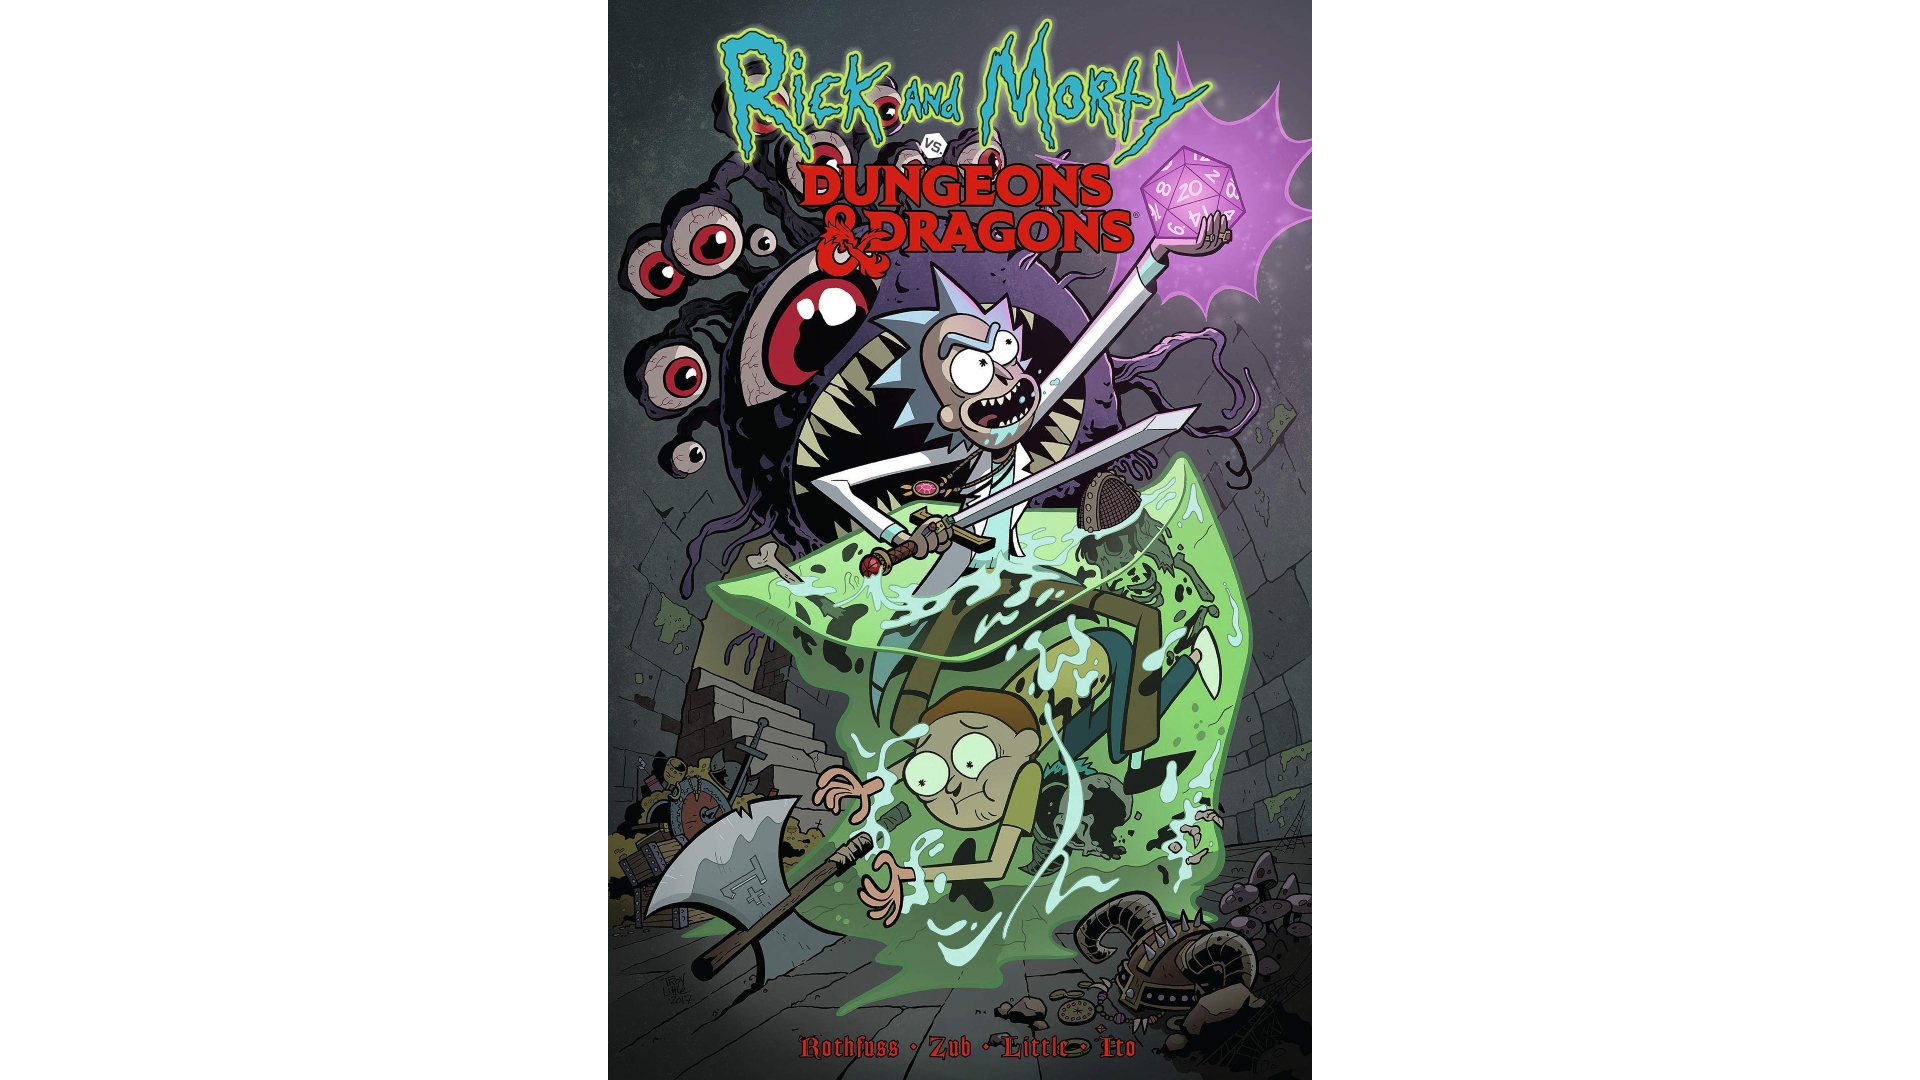 DnD gifts - Rick and Morty vs Dungeons and Dragons cover